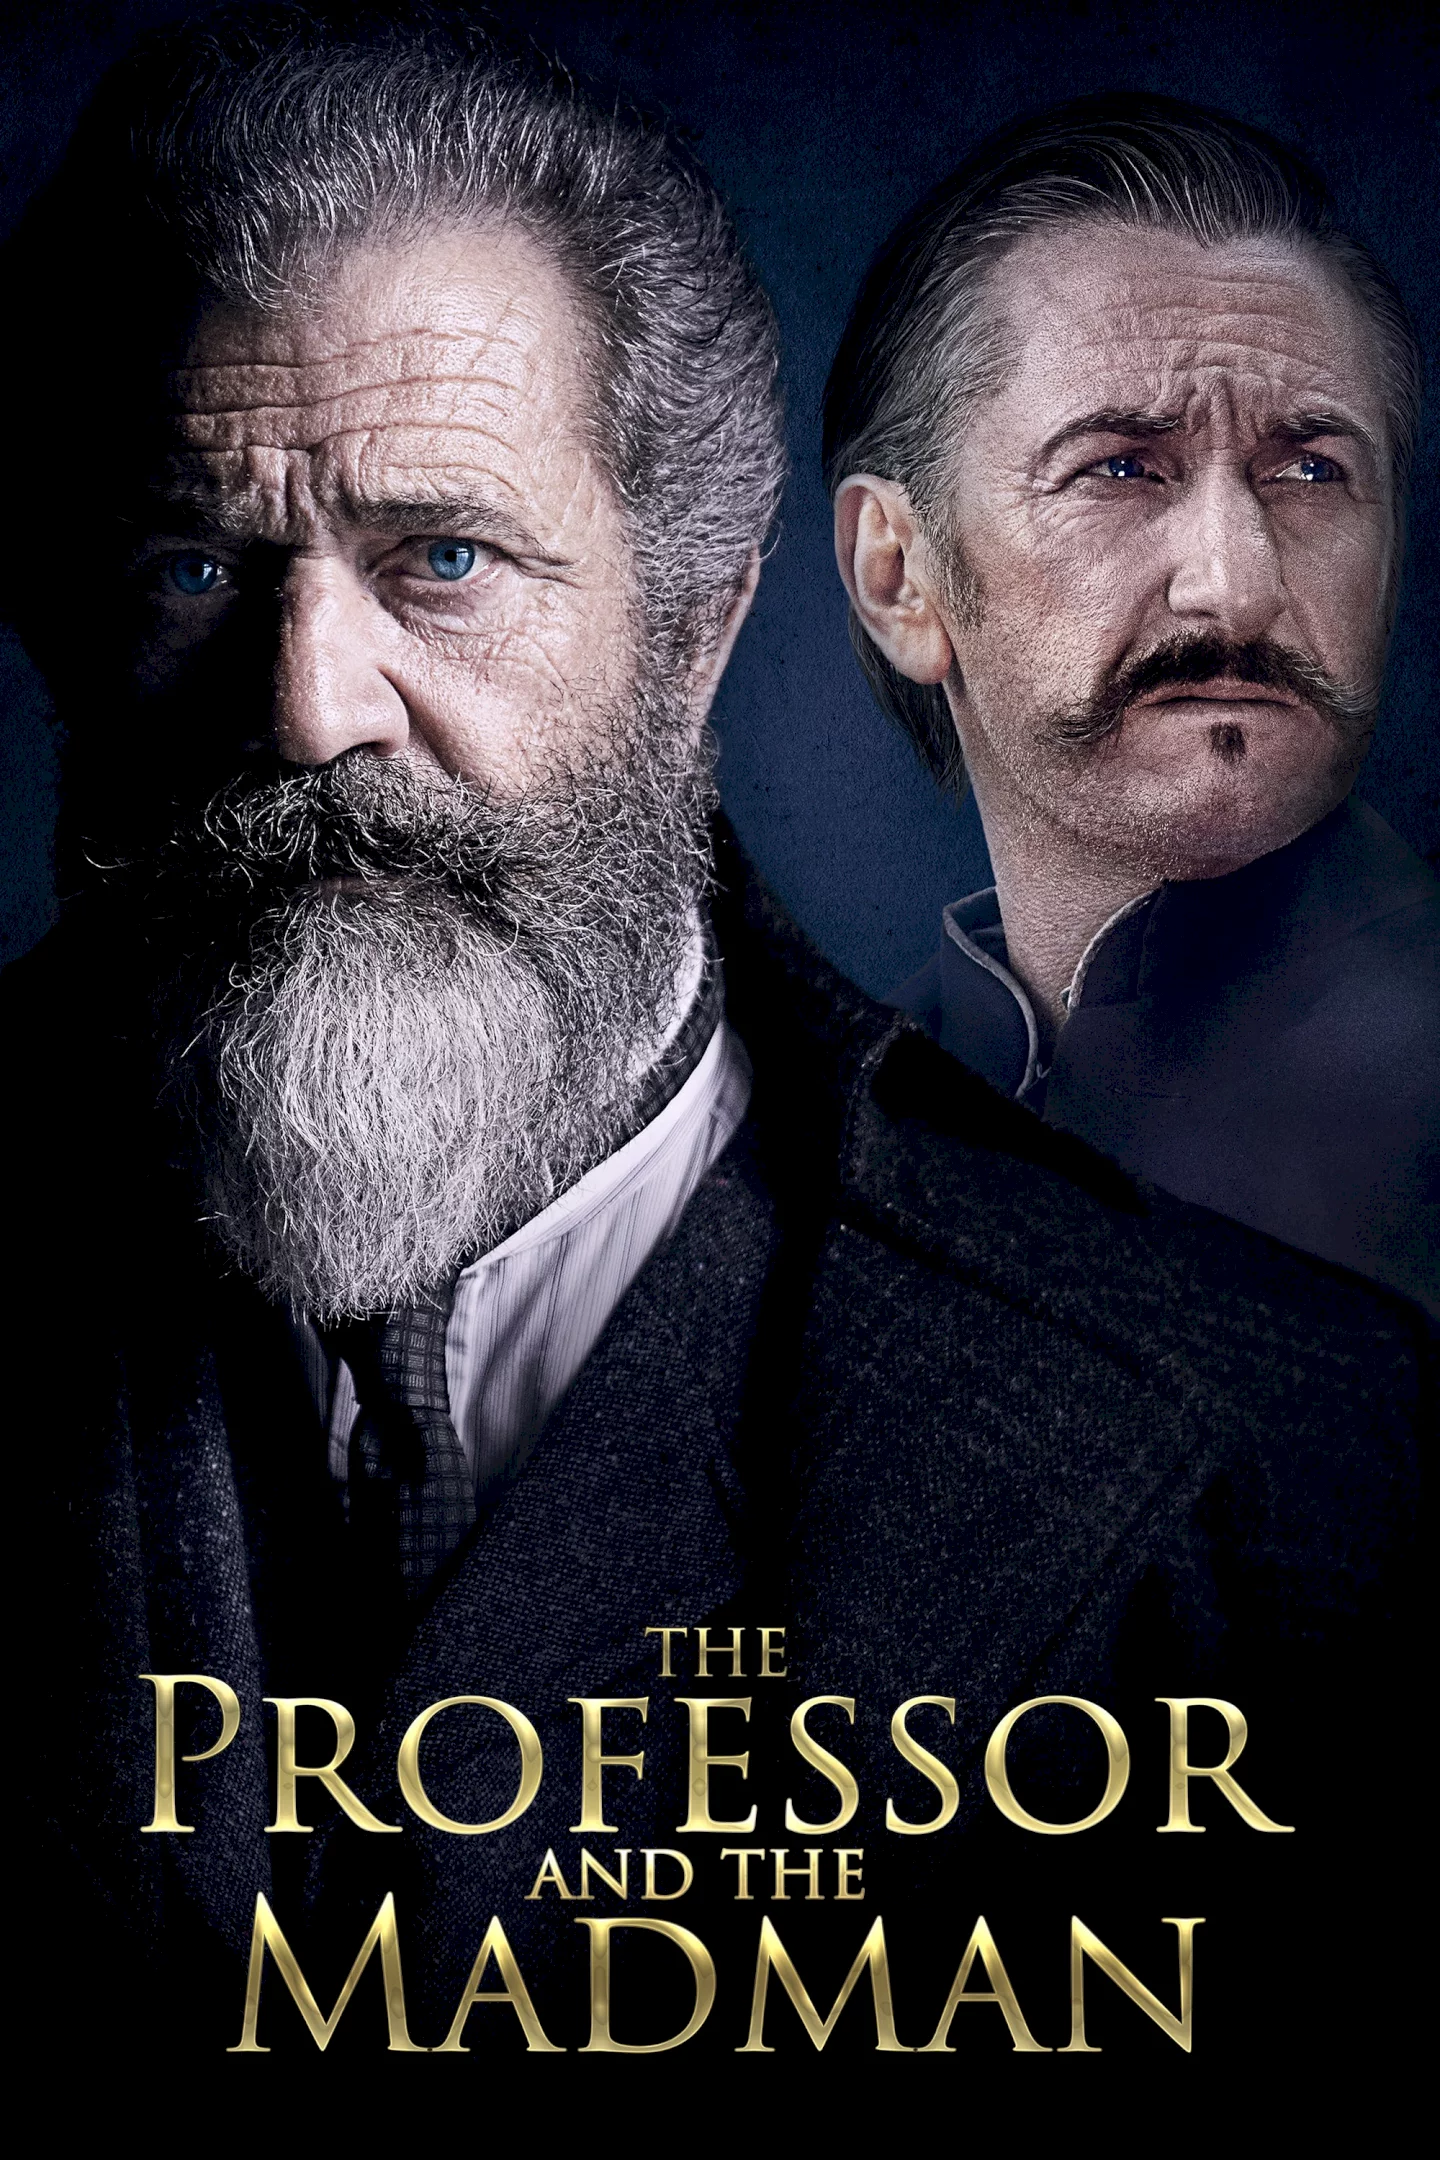 Photo 4 du film : The professor and the madman